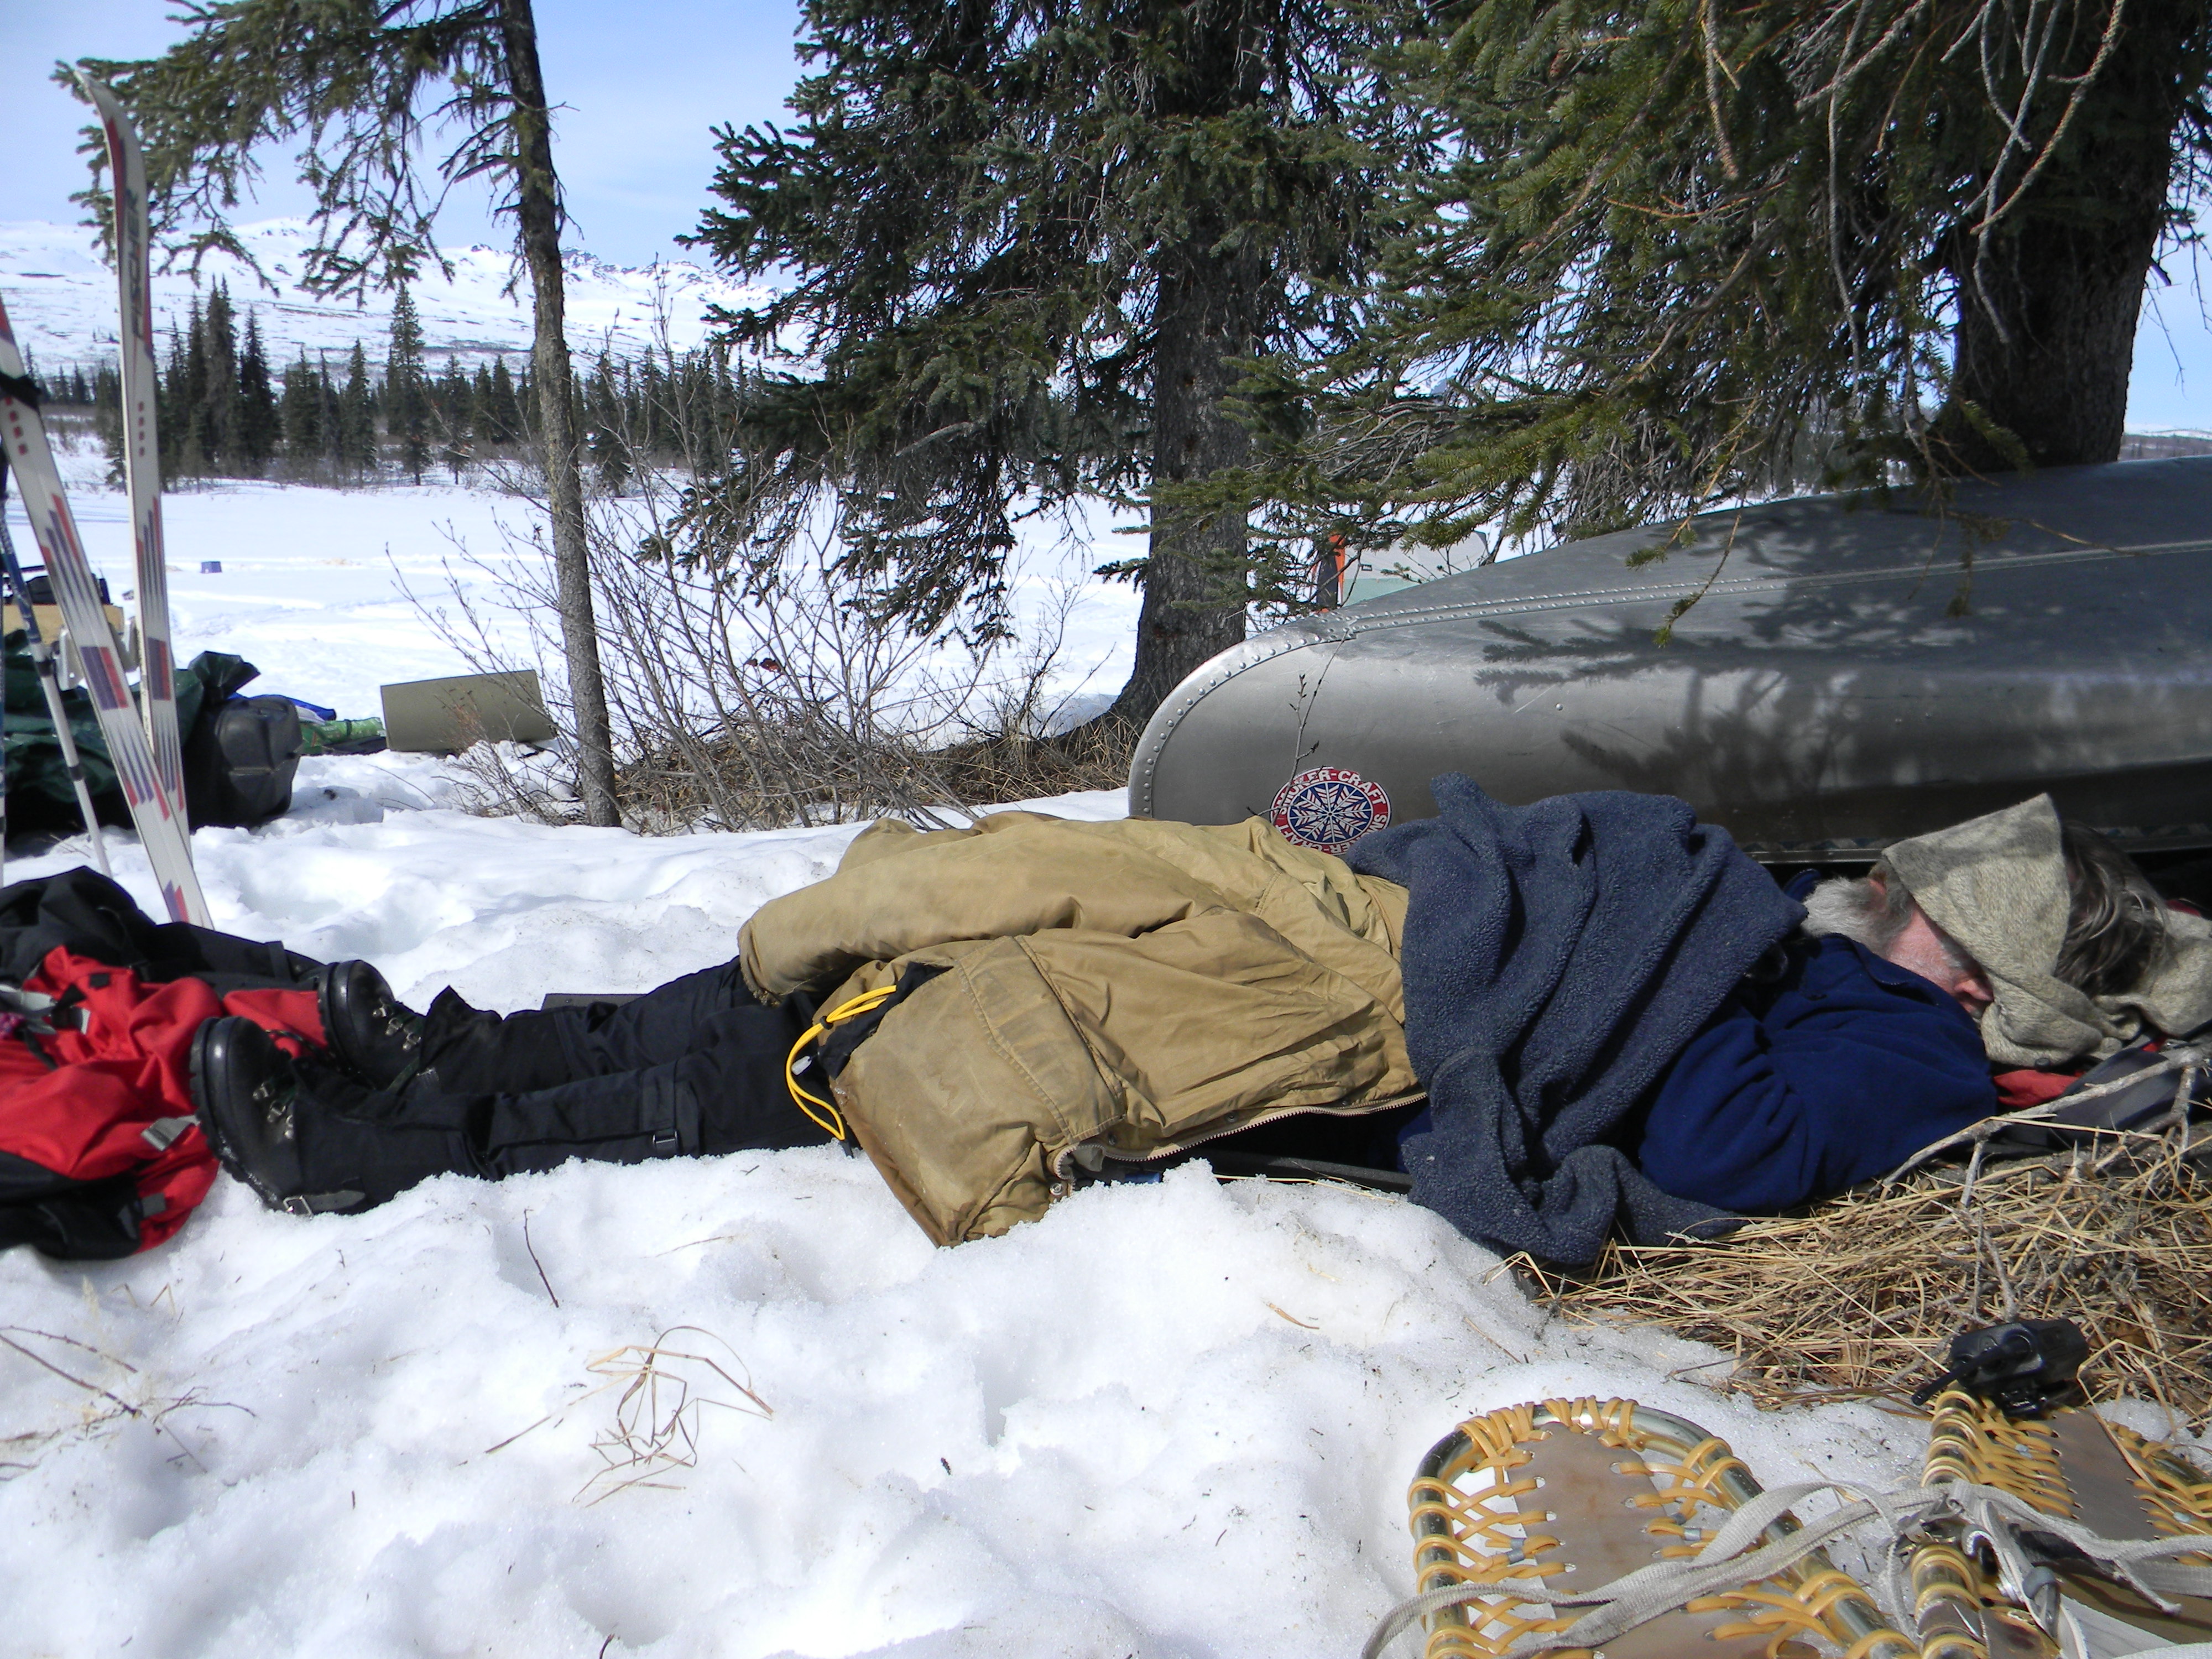 Taking a nap at the base of Mt. McKinley Alaska.